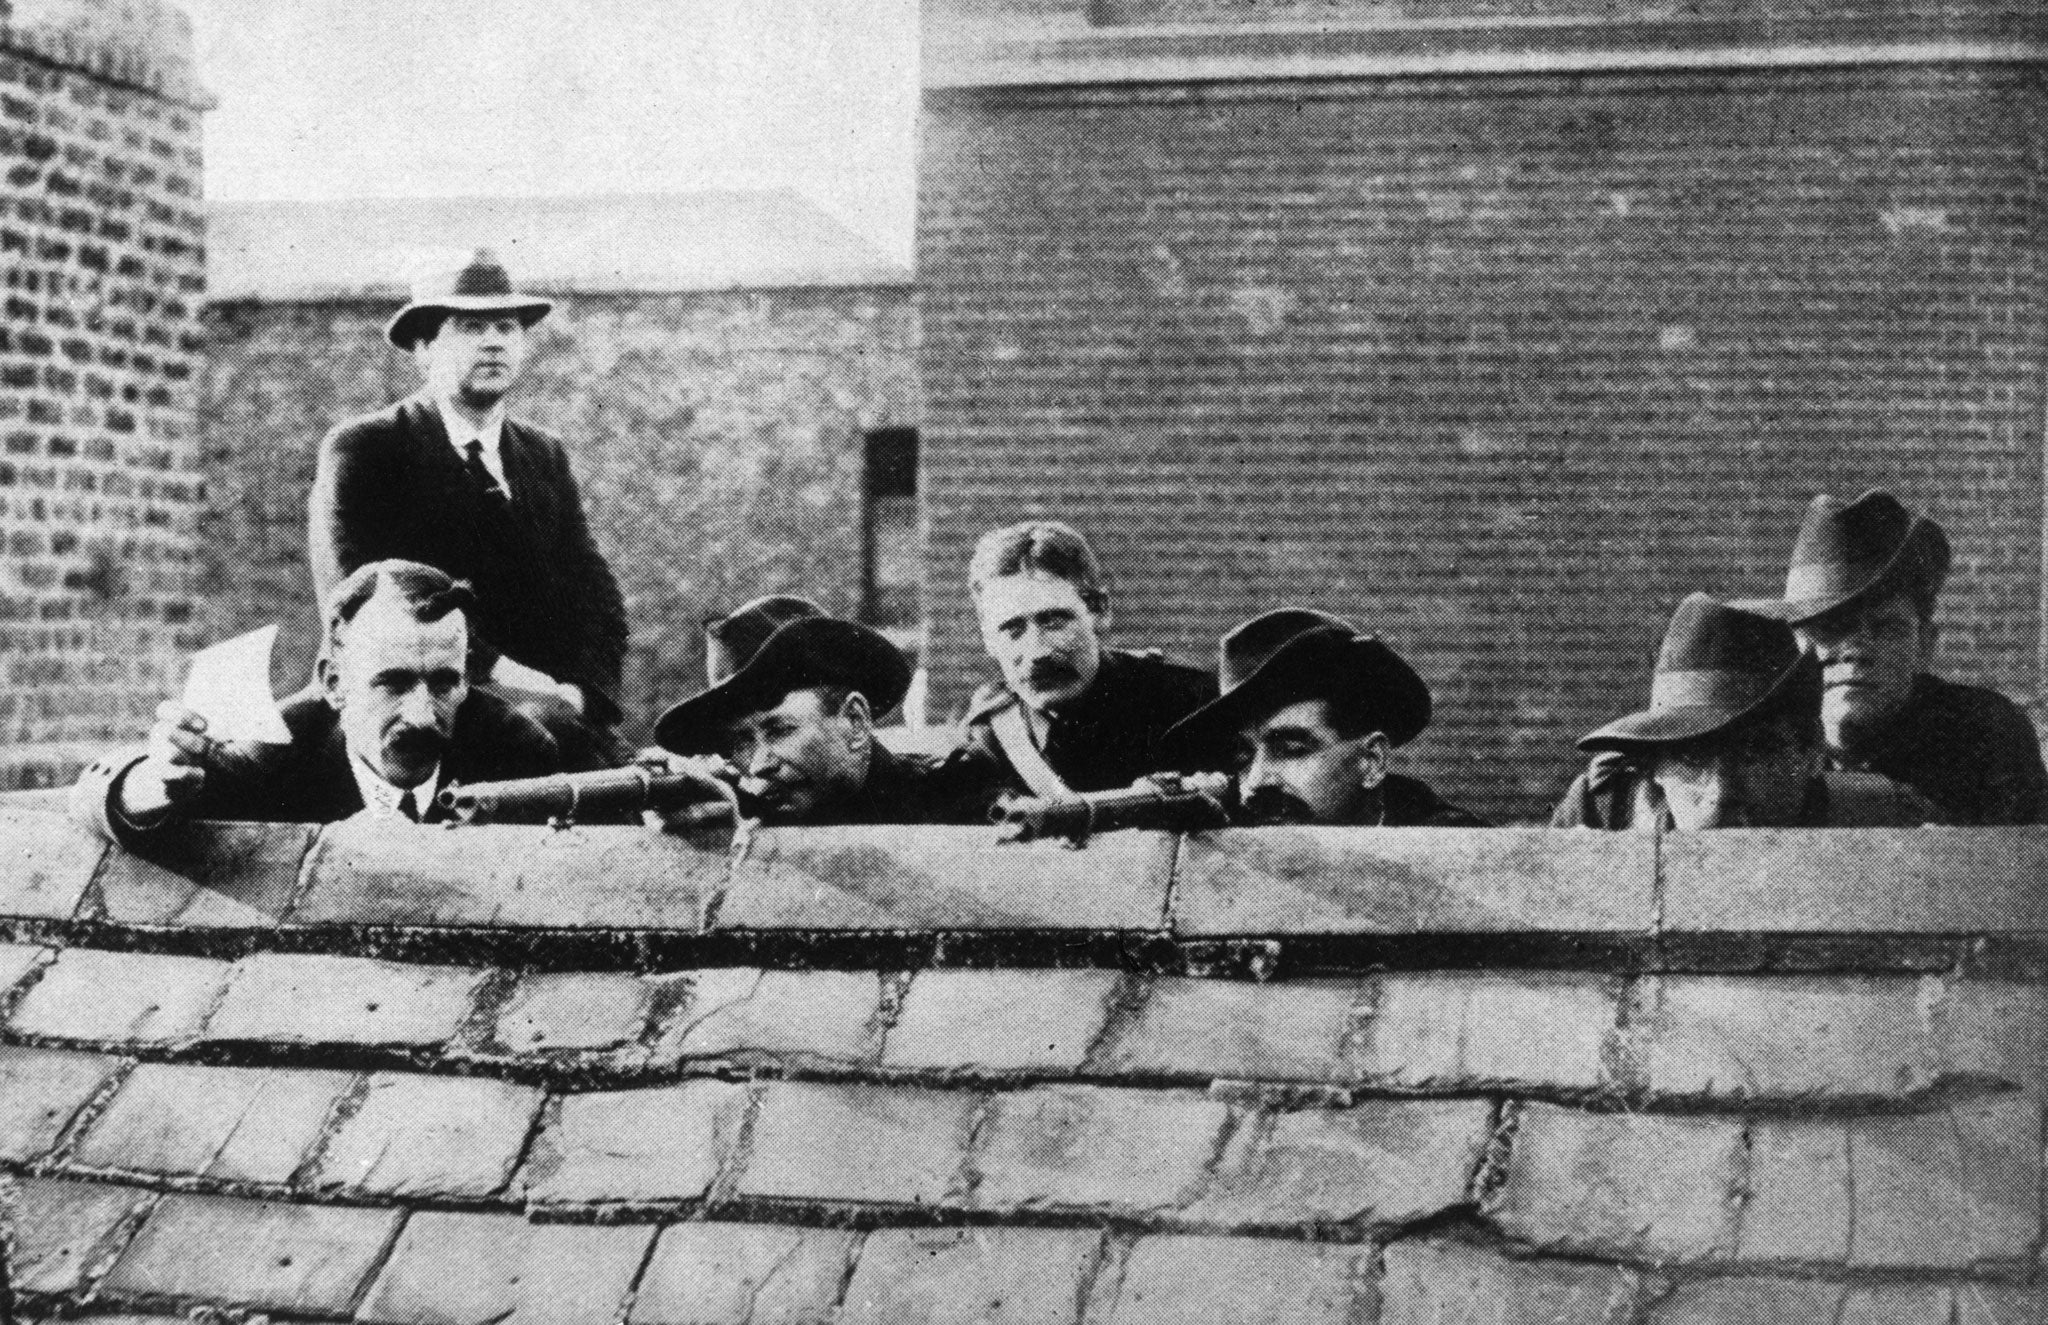 The price of freedom: Irish rebels take cover on a rooftop during the Easter Rising